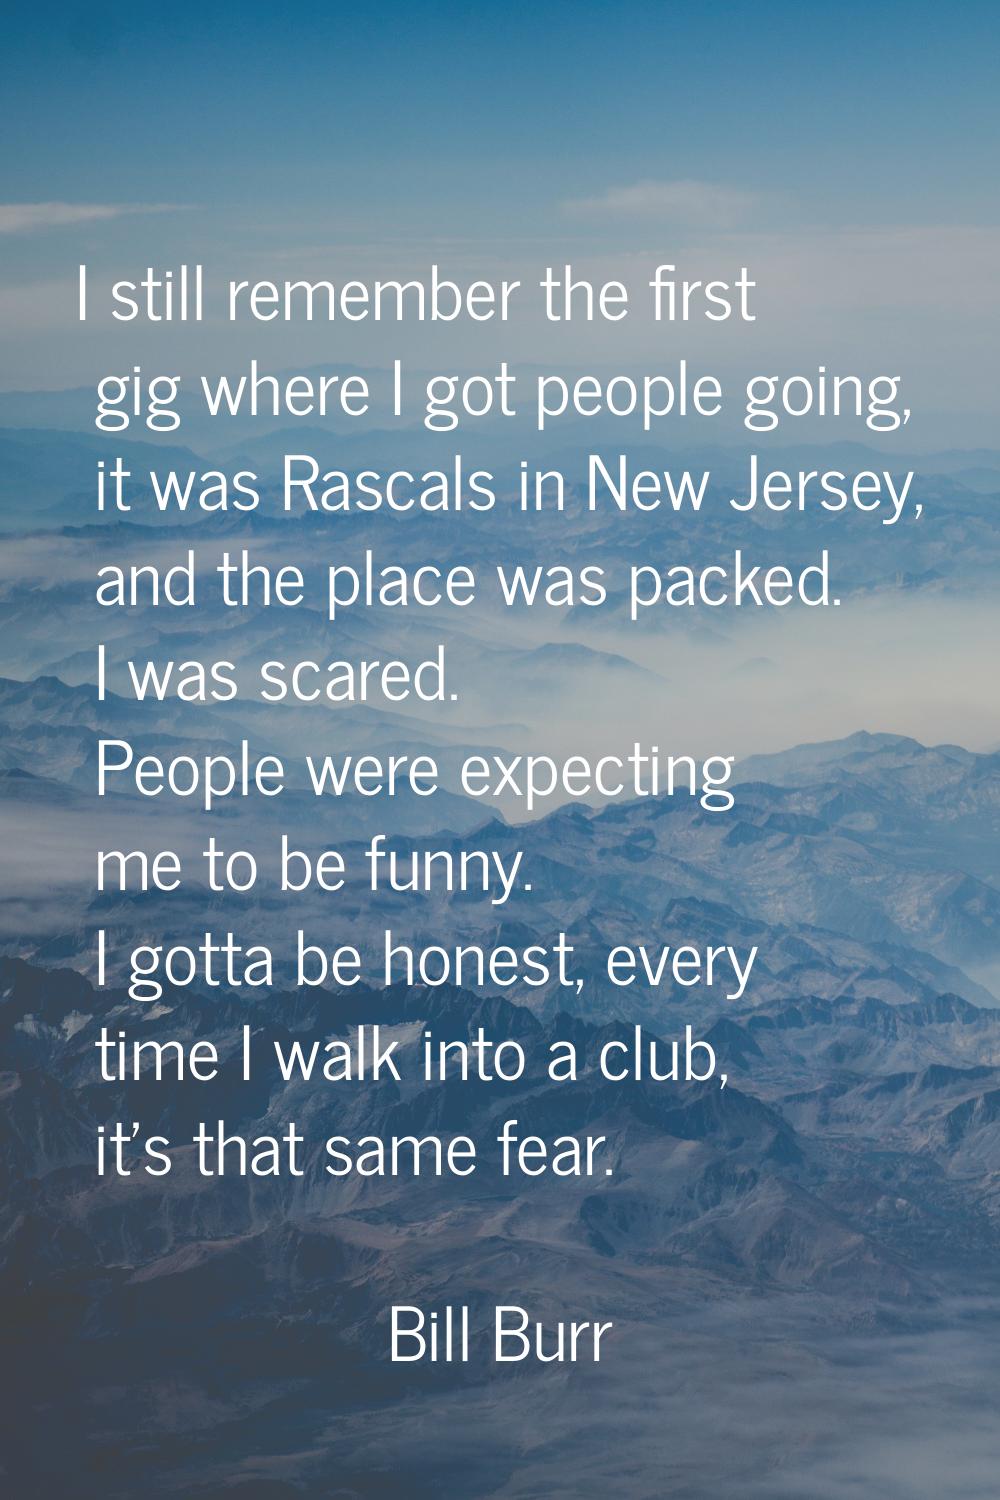 I still remember the first gig where I got people going, it was Rascals in New Jersey, and the plac